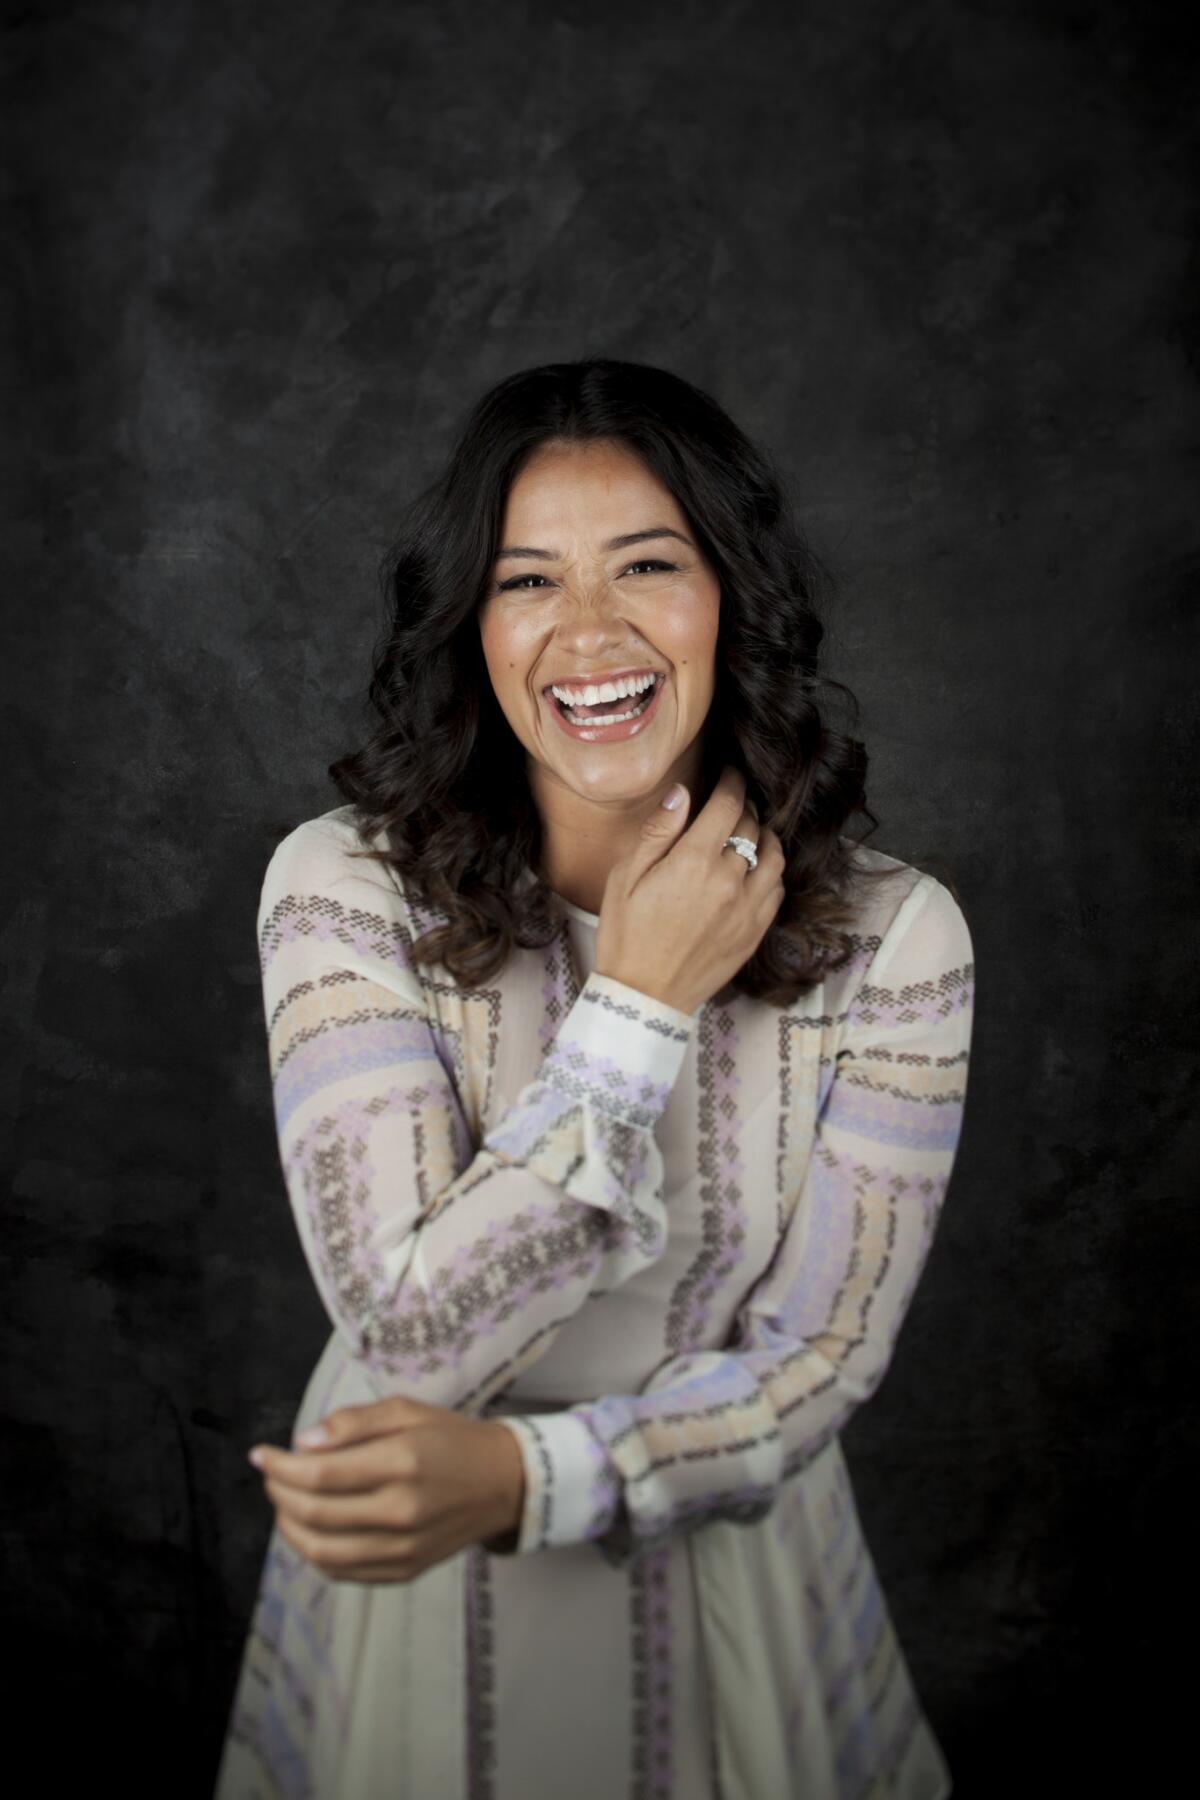 Gina Rodriguez, from the CW's "Jane the Virgin," is photographed at the Fairmont Miramar Hotel and Bungalows in Santa Monica on March 30, 2015.